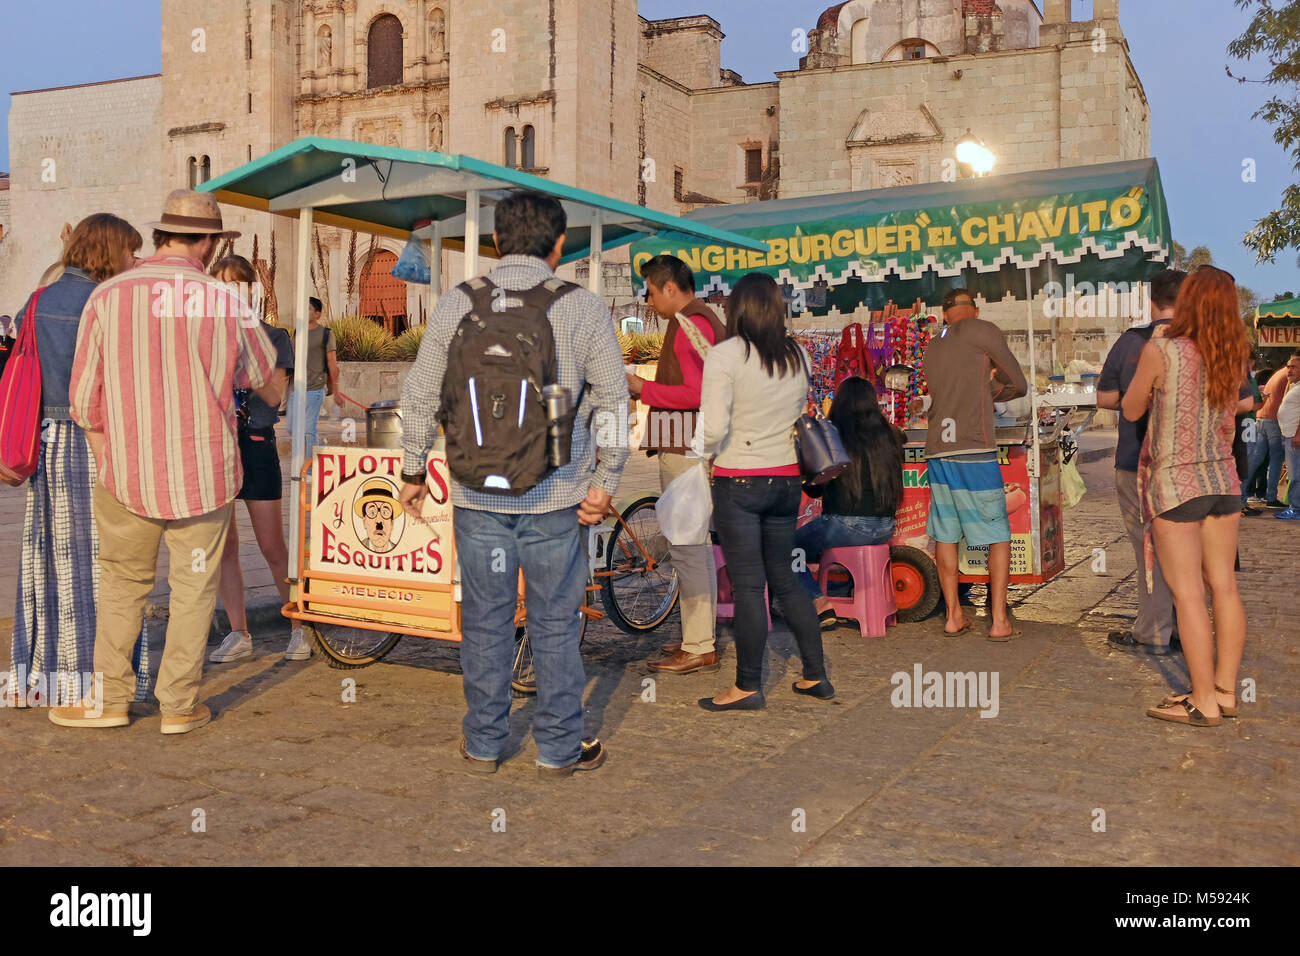 Backpacker travelers congregate around a food stand located in front of the Templo de Santo Domingo in the heart of Oaxaca, Mexico. Stock Photo